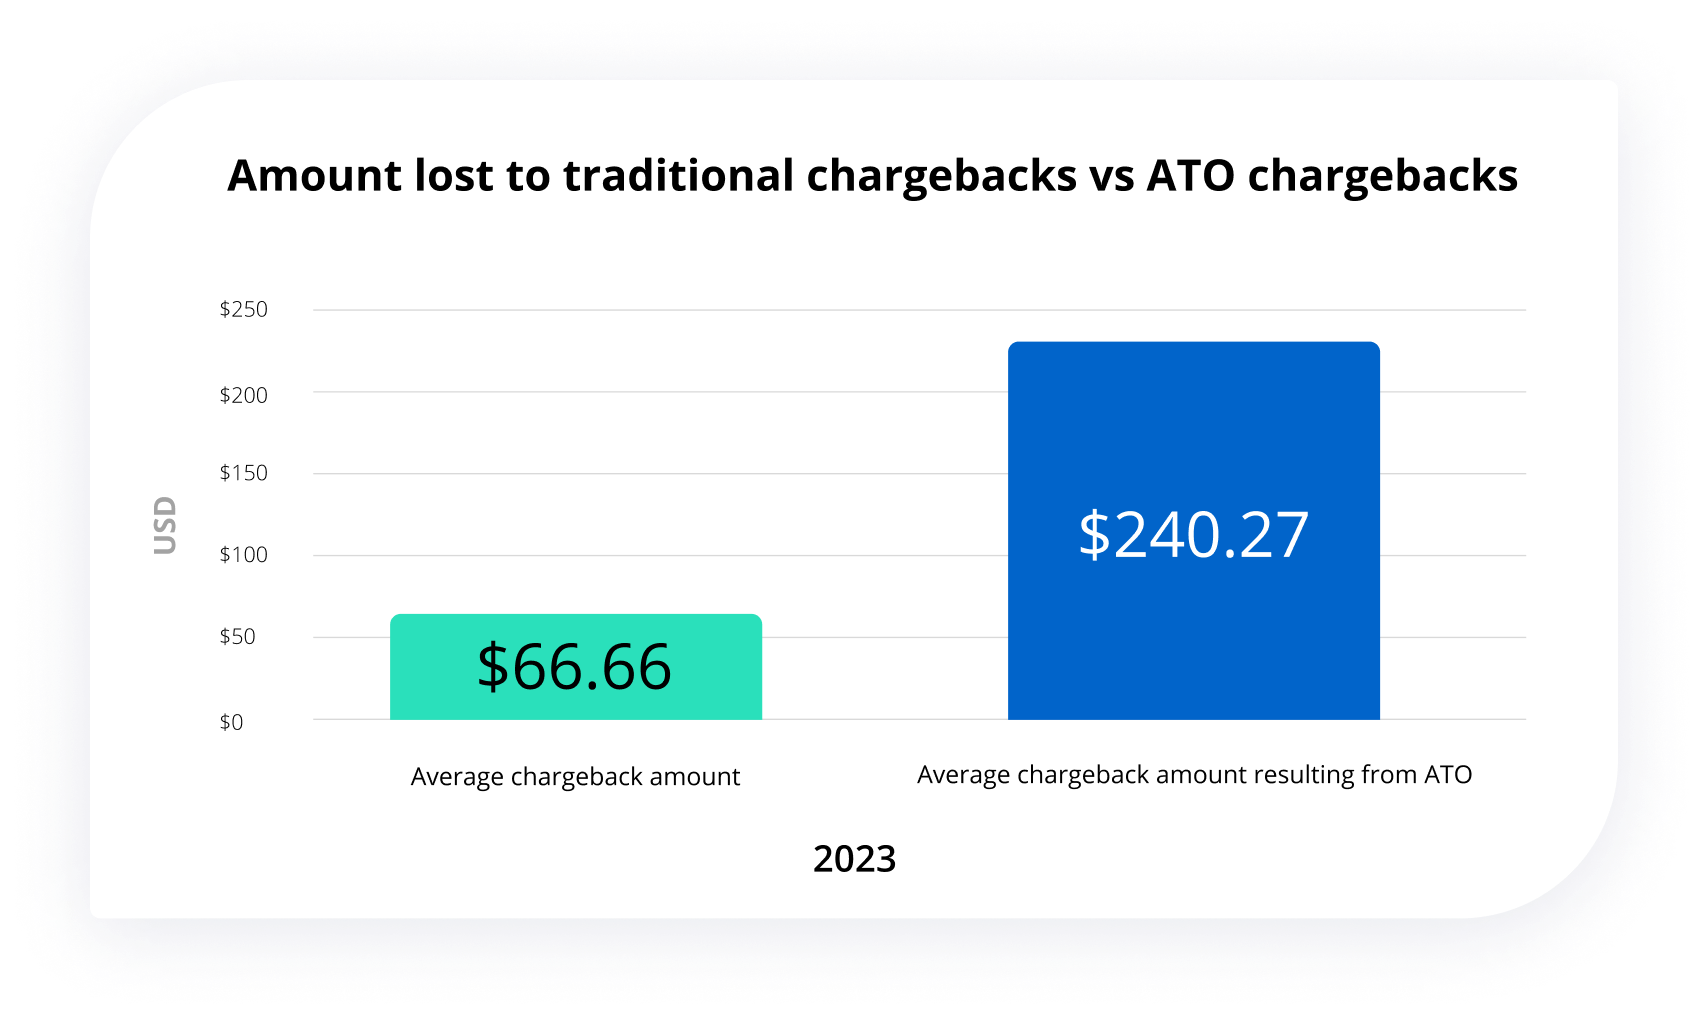 amount lost to ATO chargebacks